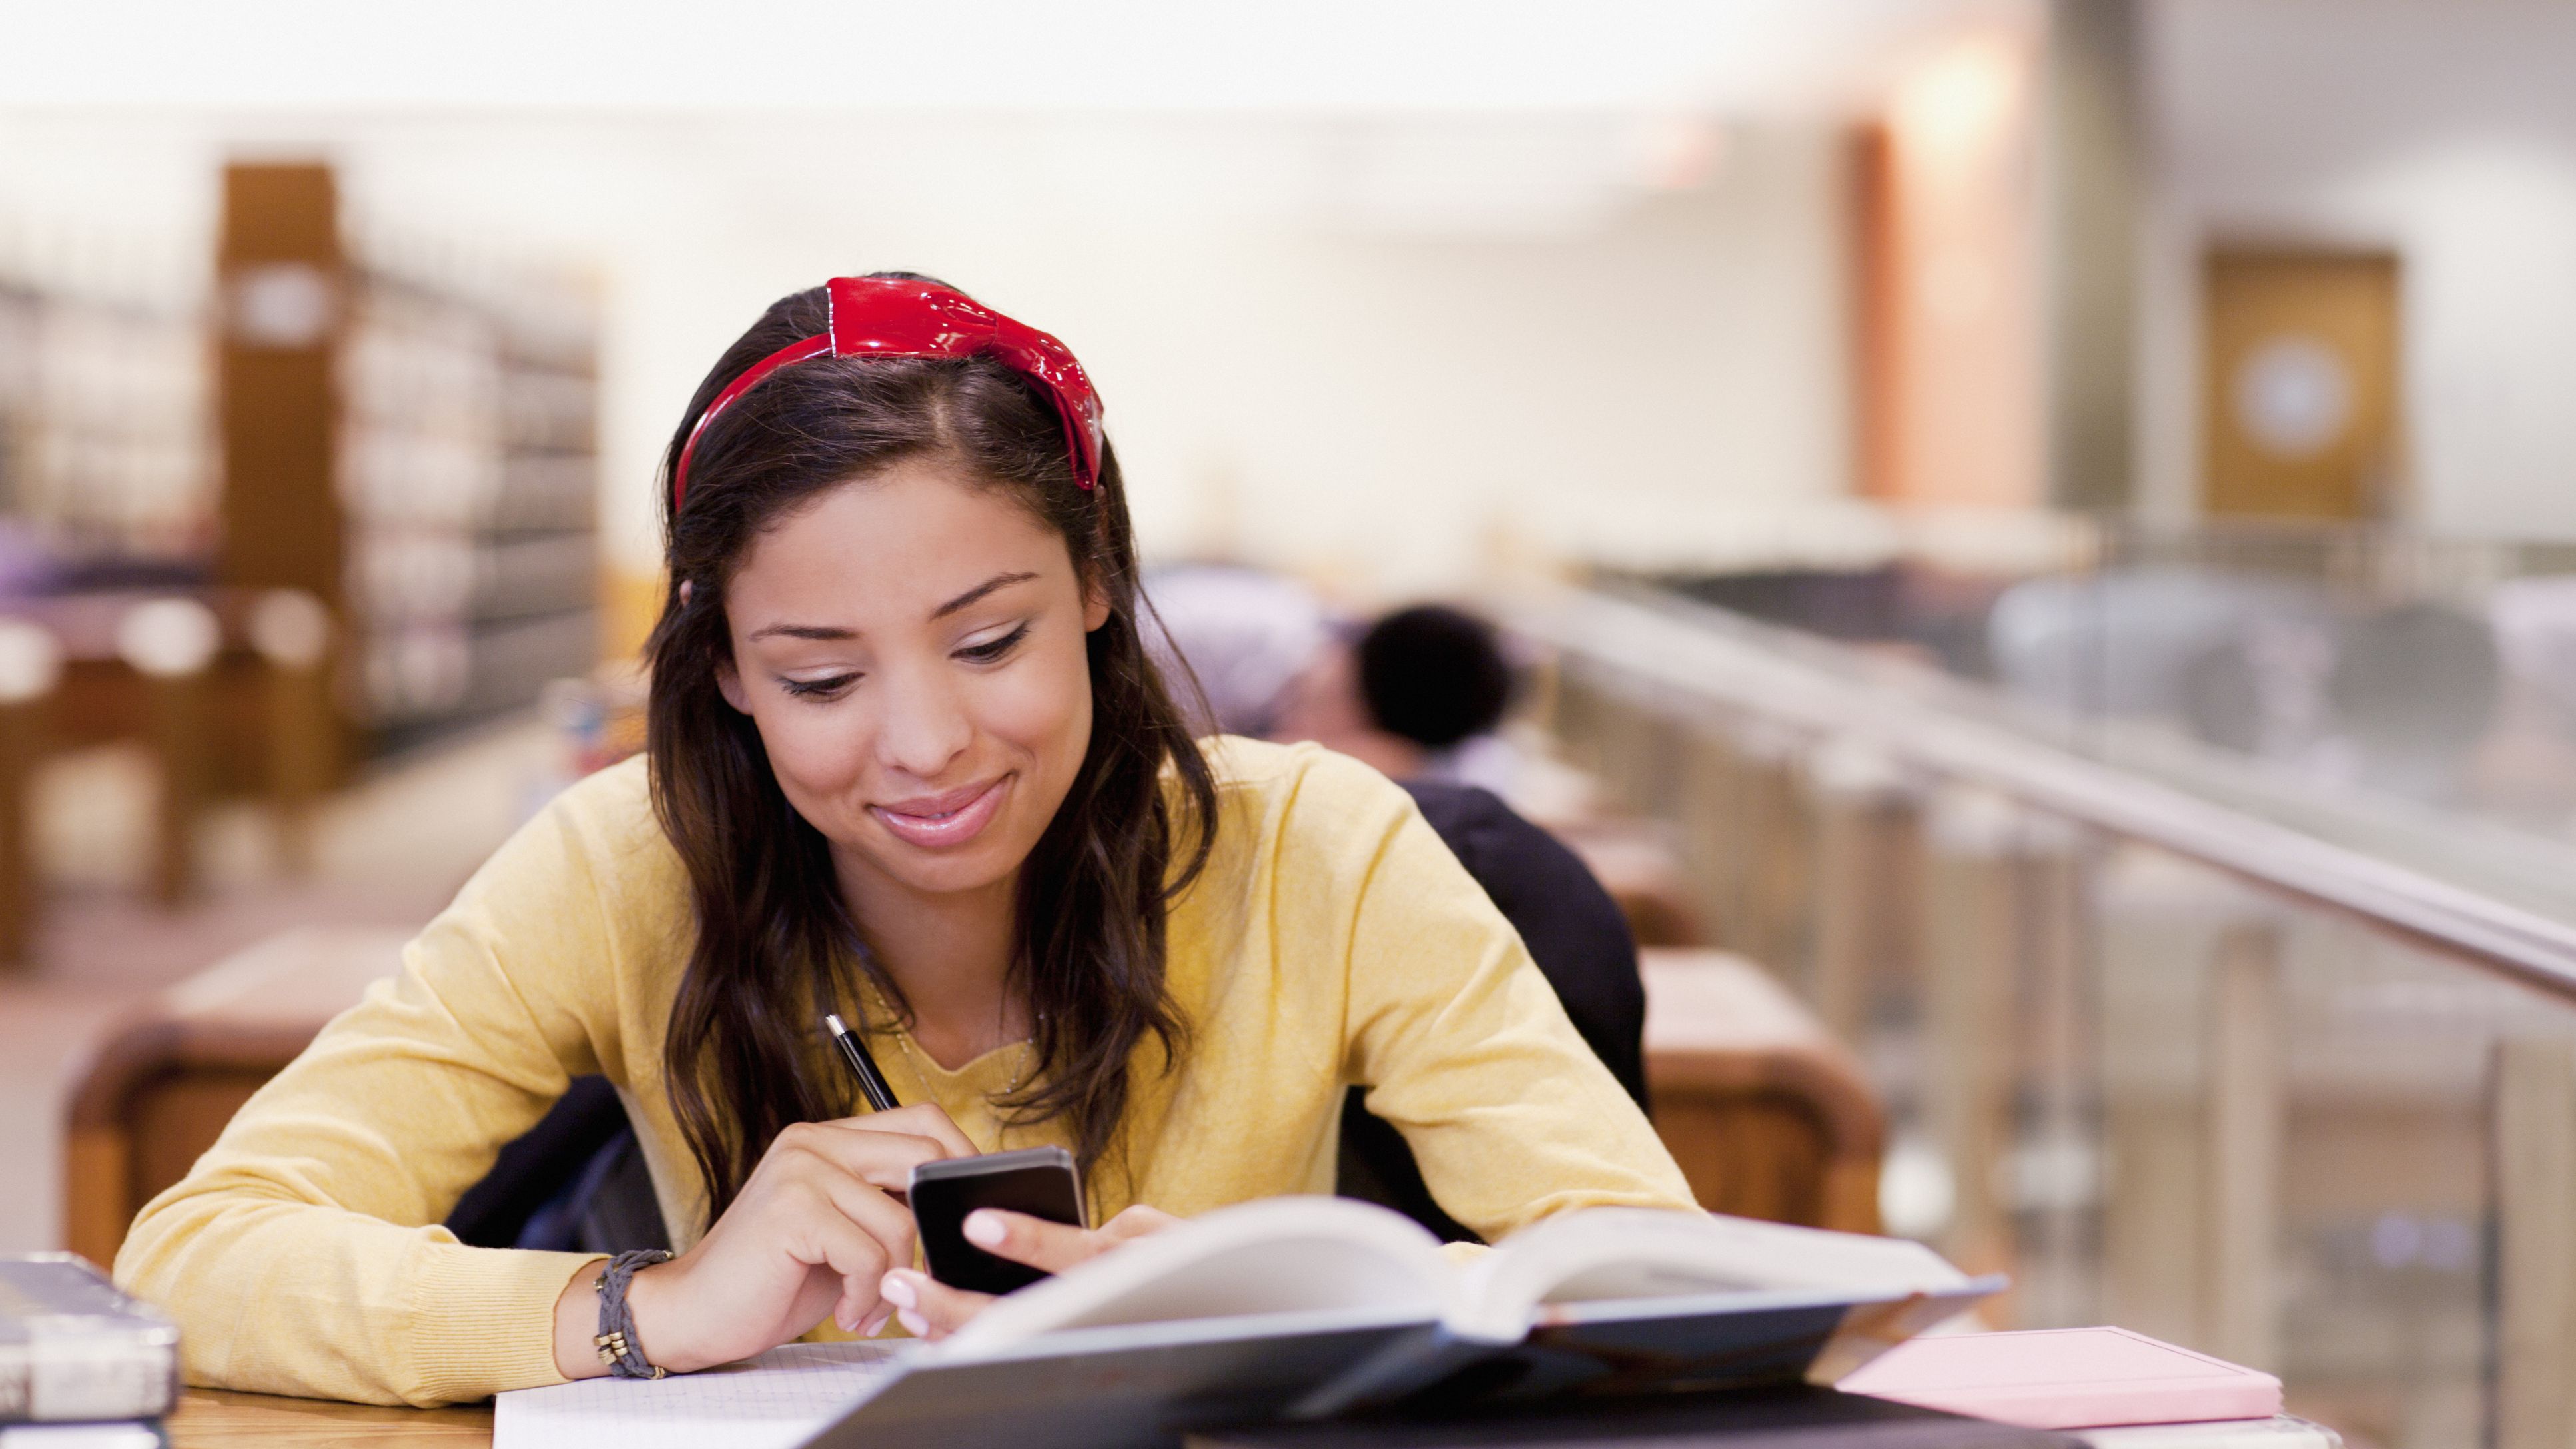 10 Pro Tips for First-Year University Students Struggling with Studies and Assignments